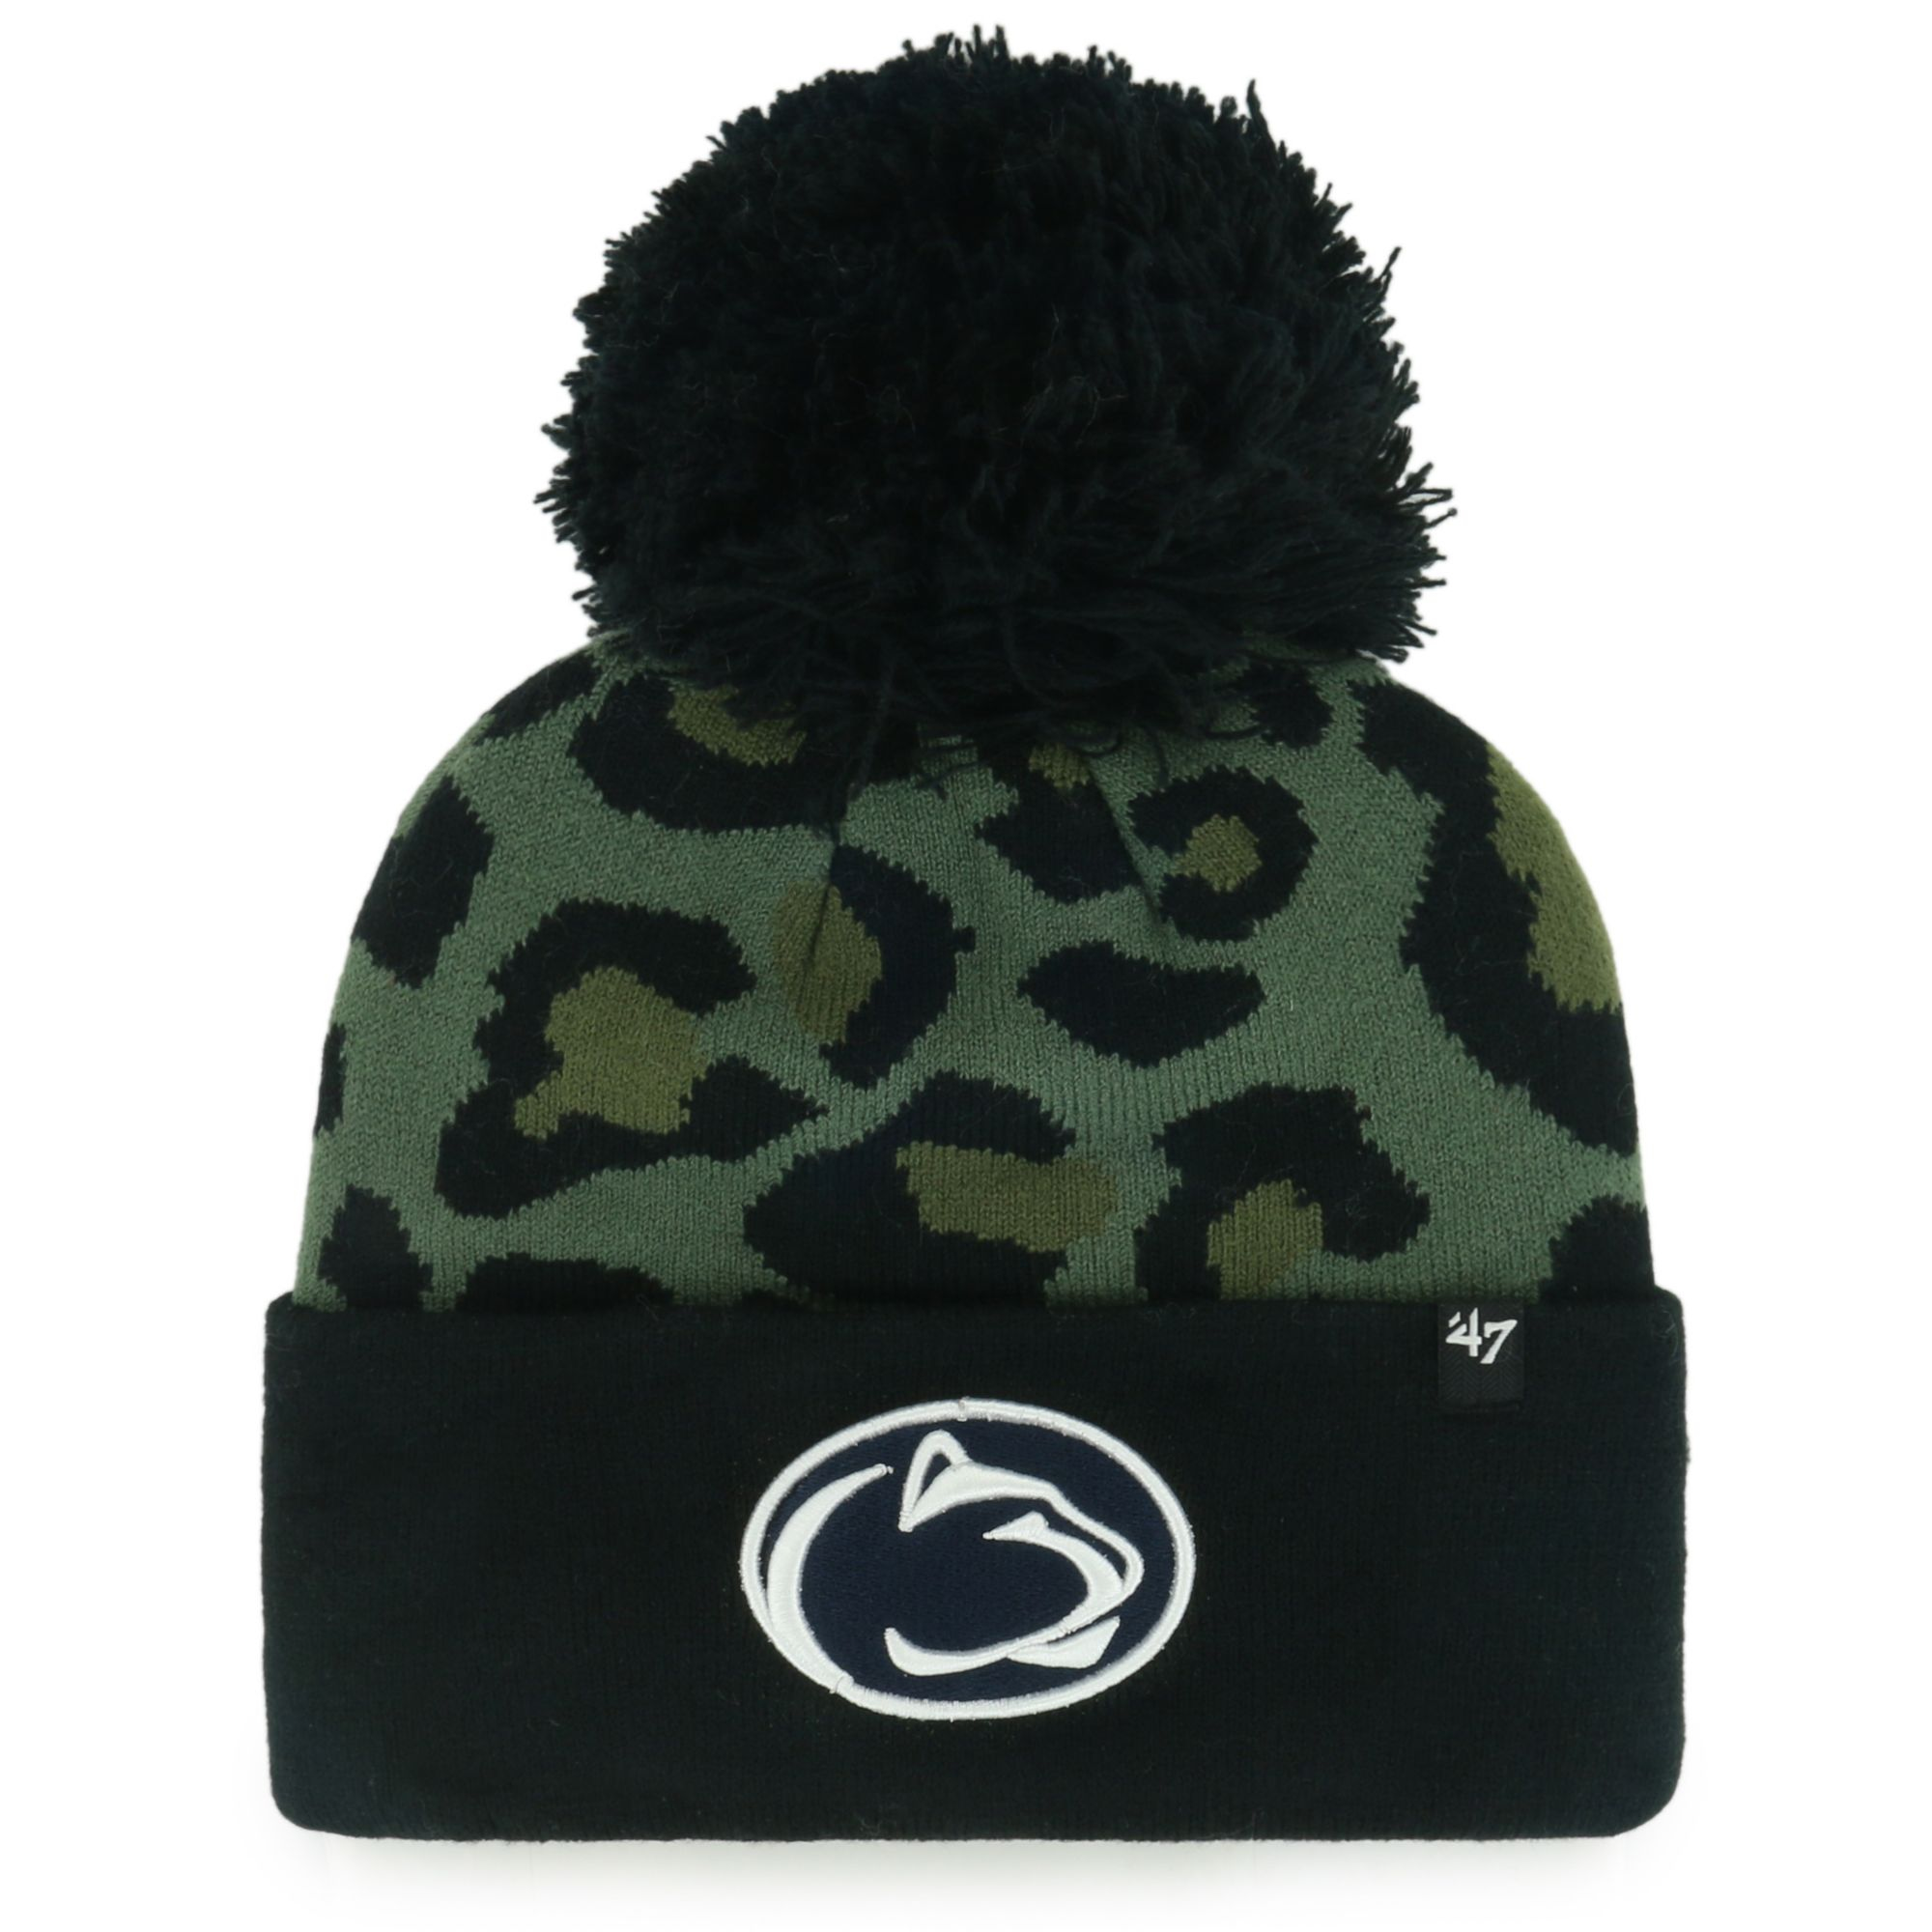 '47 Brand Men's Penn State Nittany Lions Green Cuff Knit Hat | Holiday Gift